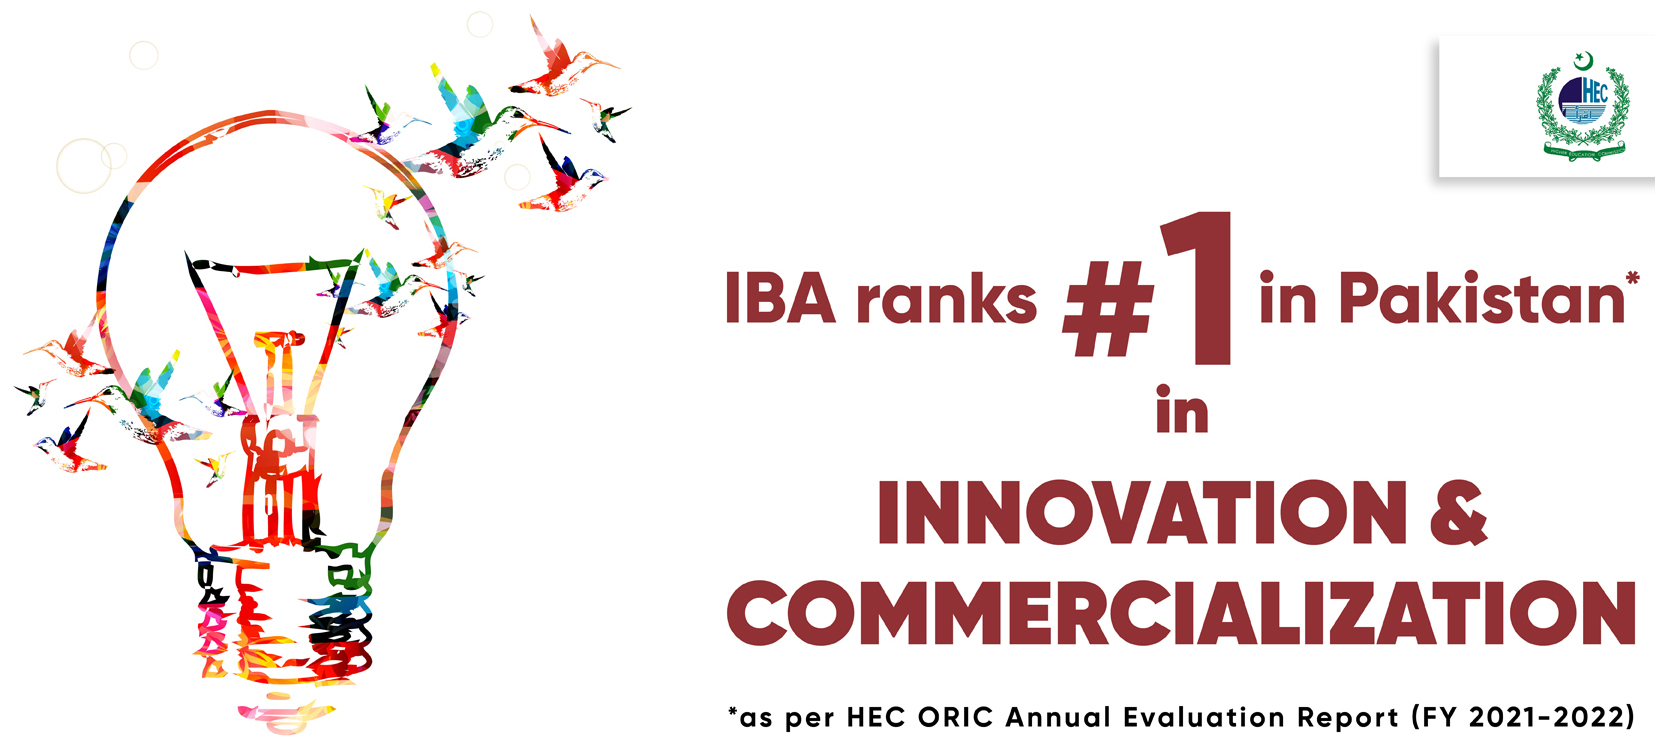 Institute of Business Administration (IBA), Karachi ranks No. 1 in Pakistan in Innovation and Commercialization